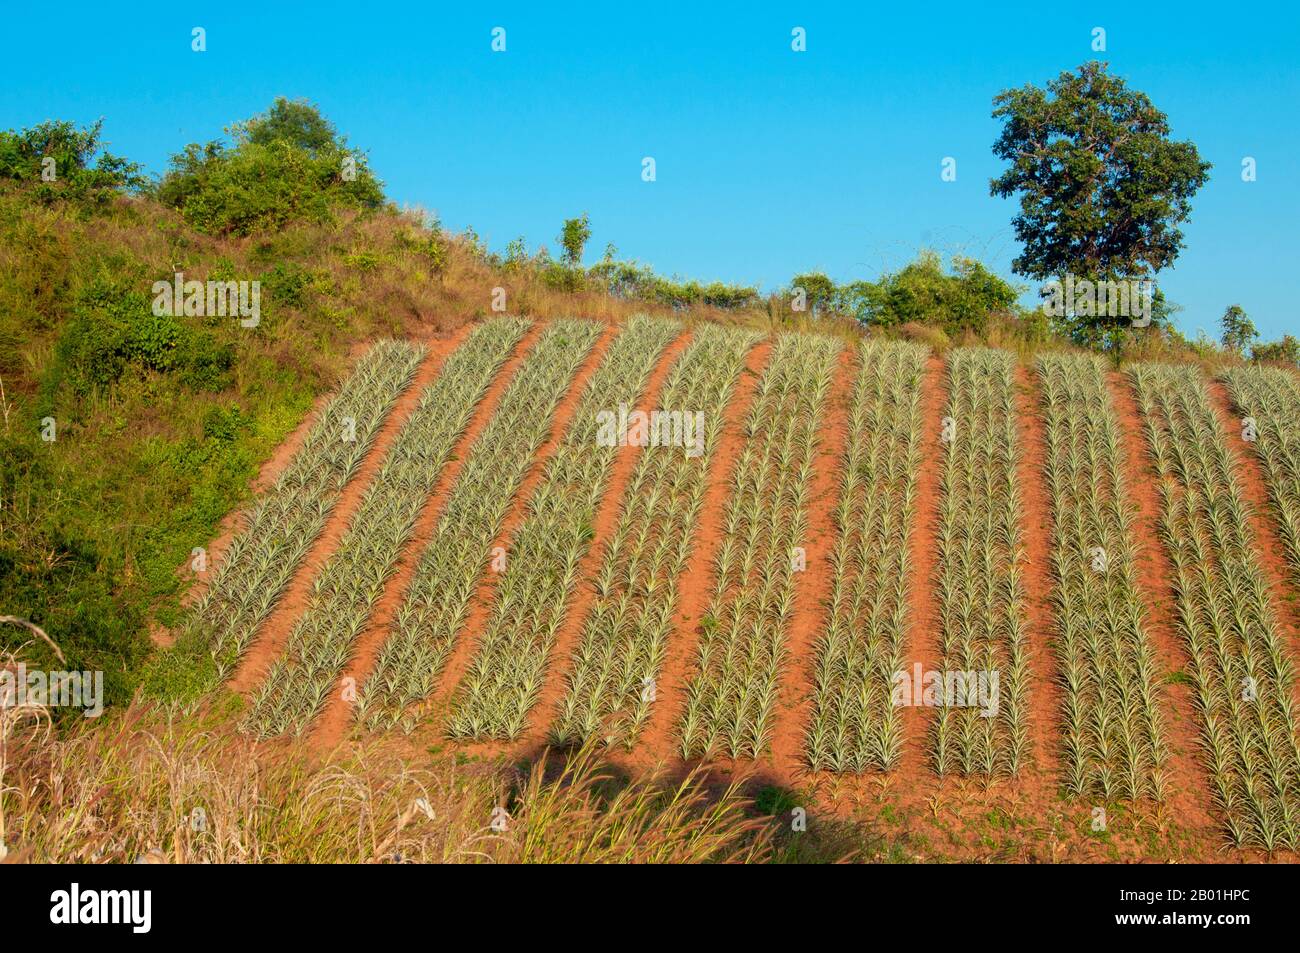 Thailand: Aloe vera growing on a hillside near Na Haeo, Loei Province.  Loei Province is located in Thailand's upper North-East. Neighboring provinces are (from east clockwise) Nong Khai, Udon Thani, Nongbua Lamphu, Khon Kaen, Phetchabun, Phitsanulok. In the north it borders Xaignabouli and Vientiane Provinces of Laos.  The province is covered with low mountains, while the capital Loei is located in a fertile basin. The Loei River, which flows through the province, is a tributary of the Mekong which, together with the smaller Hueang River, forms the northern boundary of the province with Laos. Stock Photo